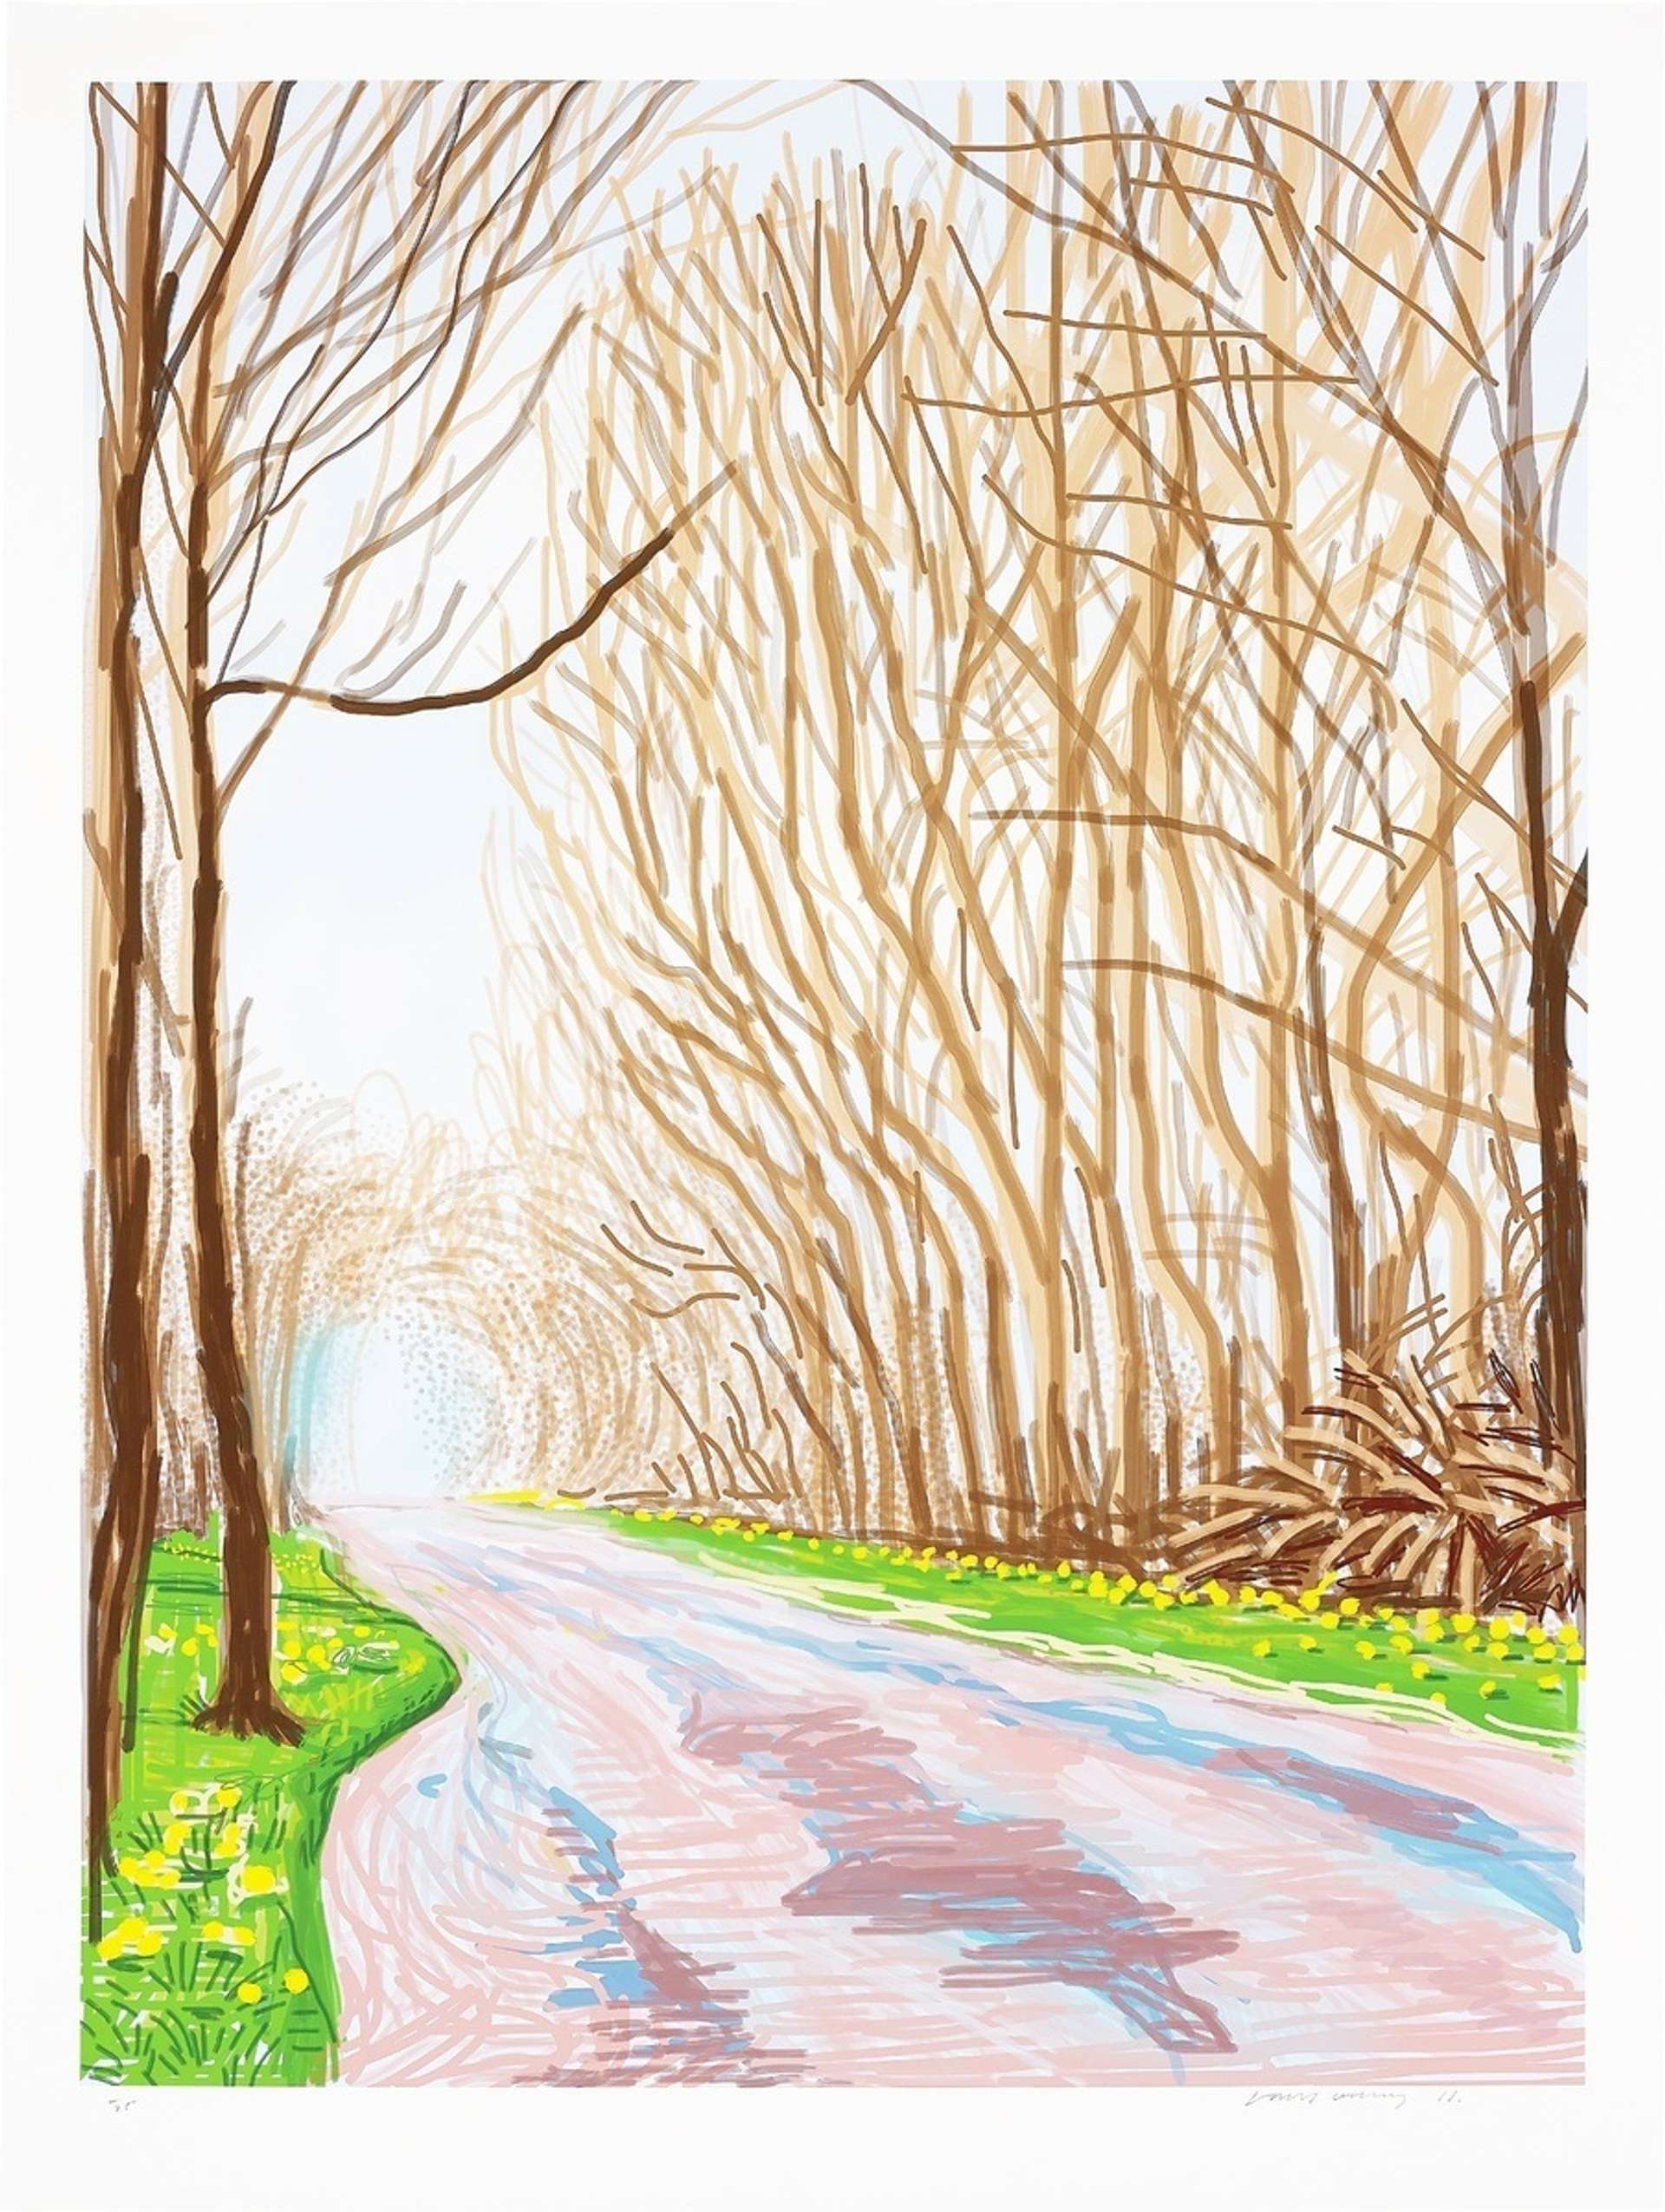 The Arrival Of Spring In Woldgate East Yorkshire, 1st April 2011 by David Hockney